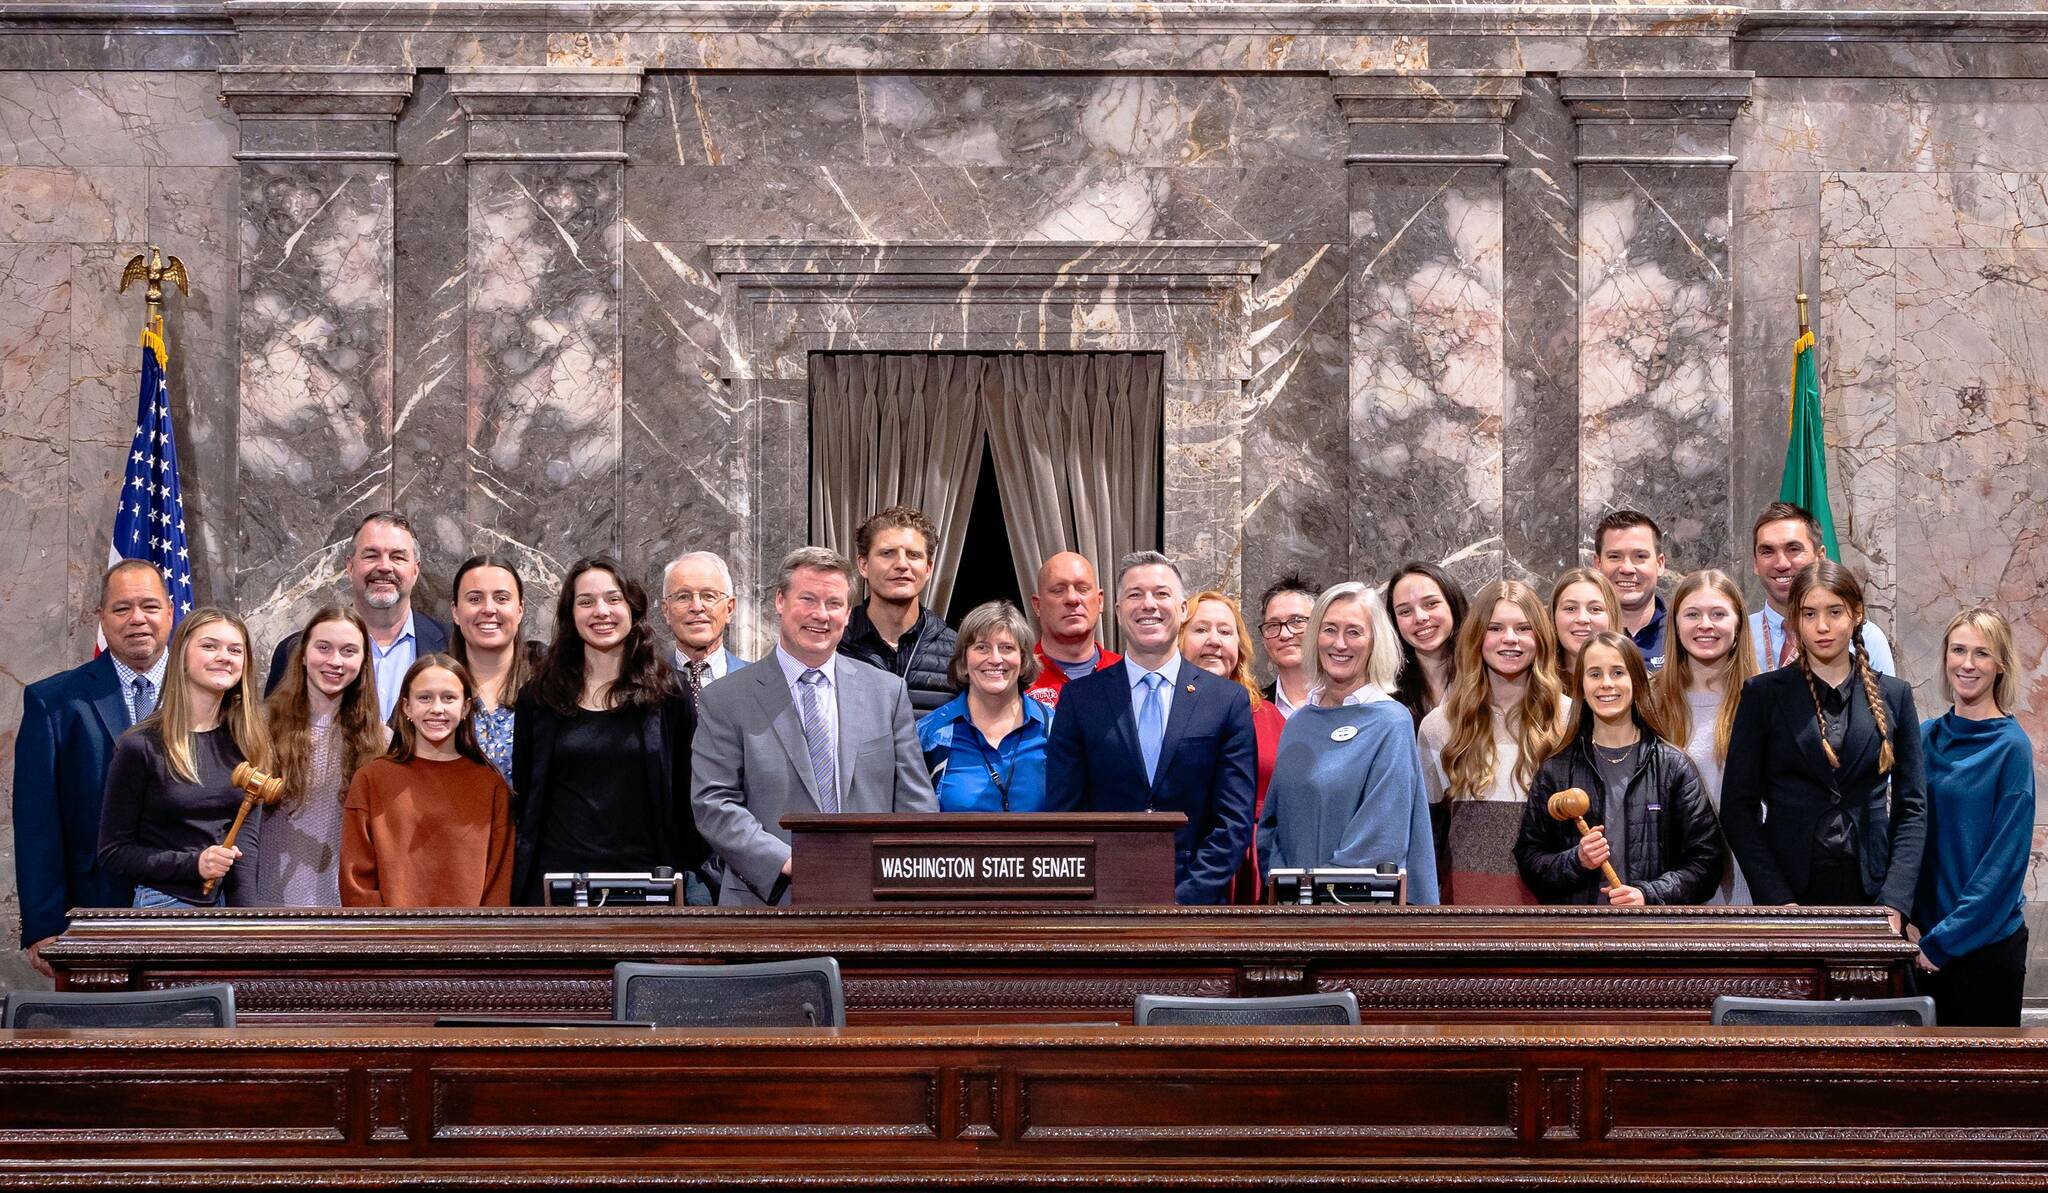 Sen. Mark Mullet, Sen. Brad Hawkins, Representative Lisa Callan, the Mt. Si Girls Cross Country Team and their families pose for a group photo in the Senate chambers, alongside staff from the Snoqualmie Valley School District, Mayor Mary Miller of North Bend, and officials from the WIAA.